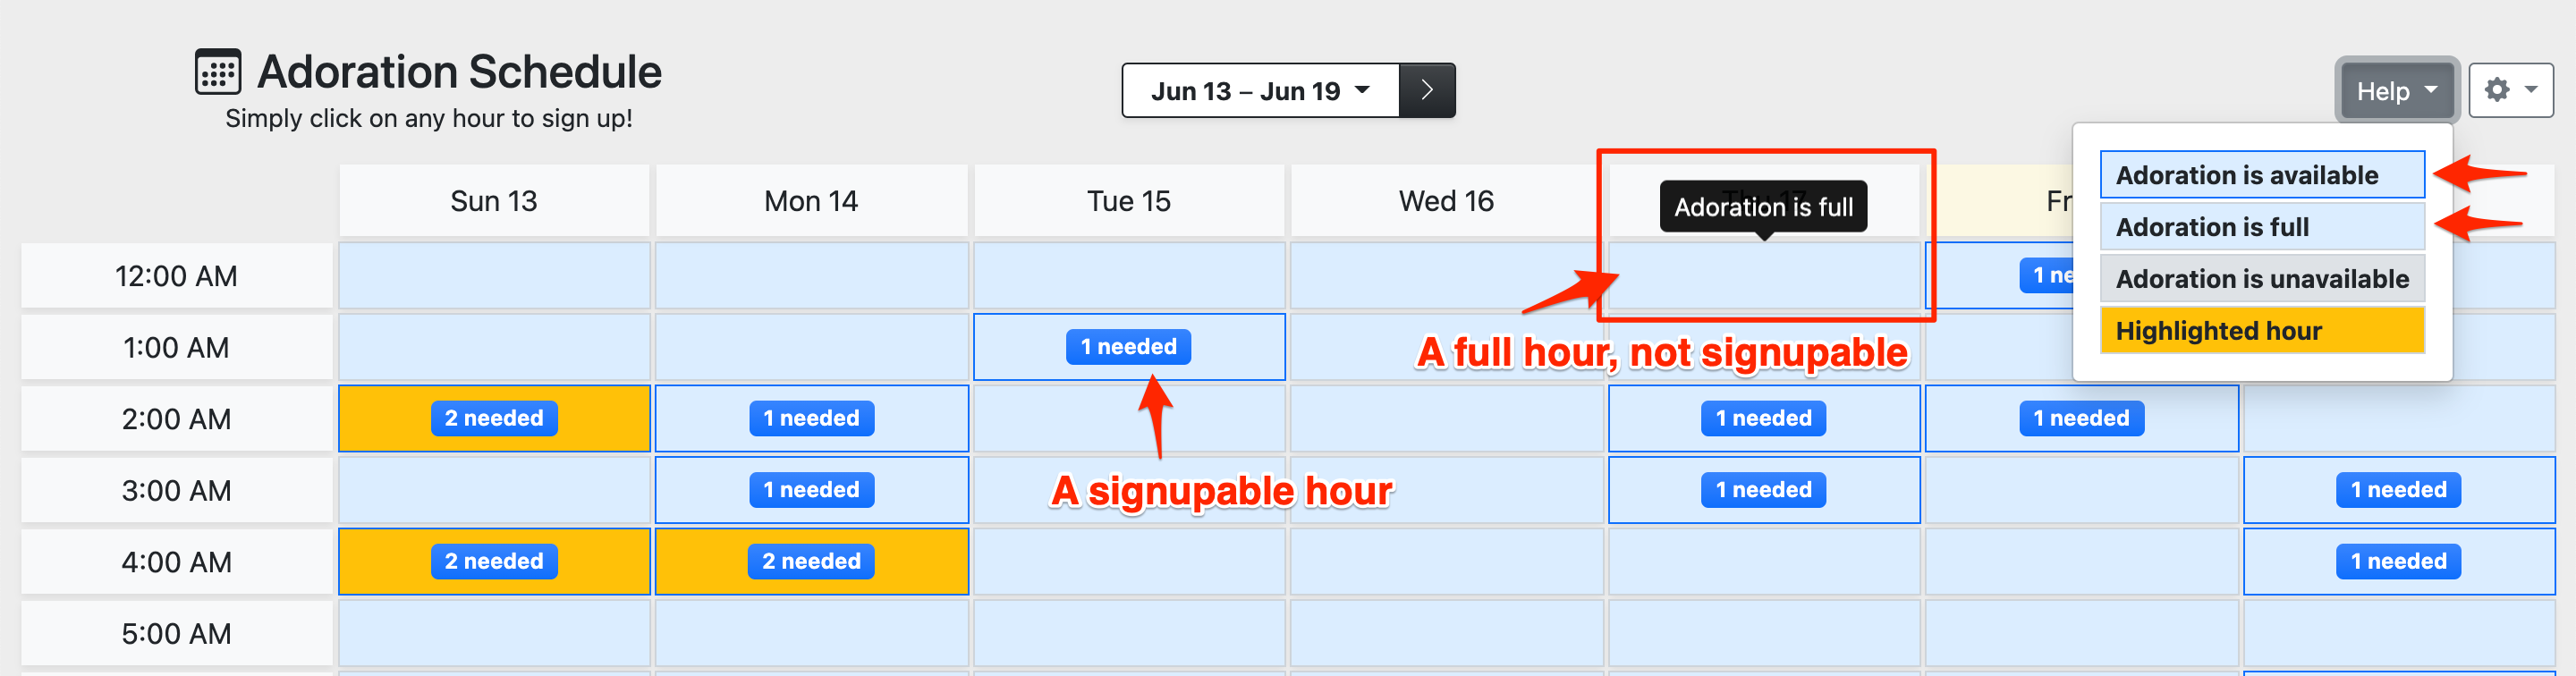 Schedule with "available and signupable" hours, and "available but full" hours